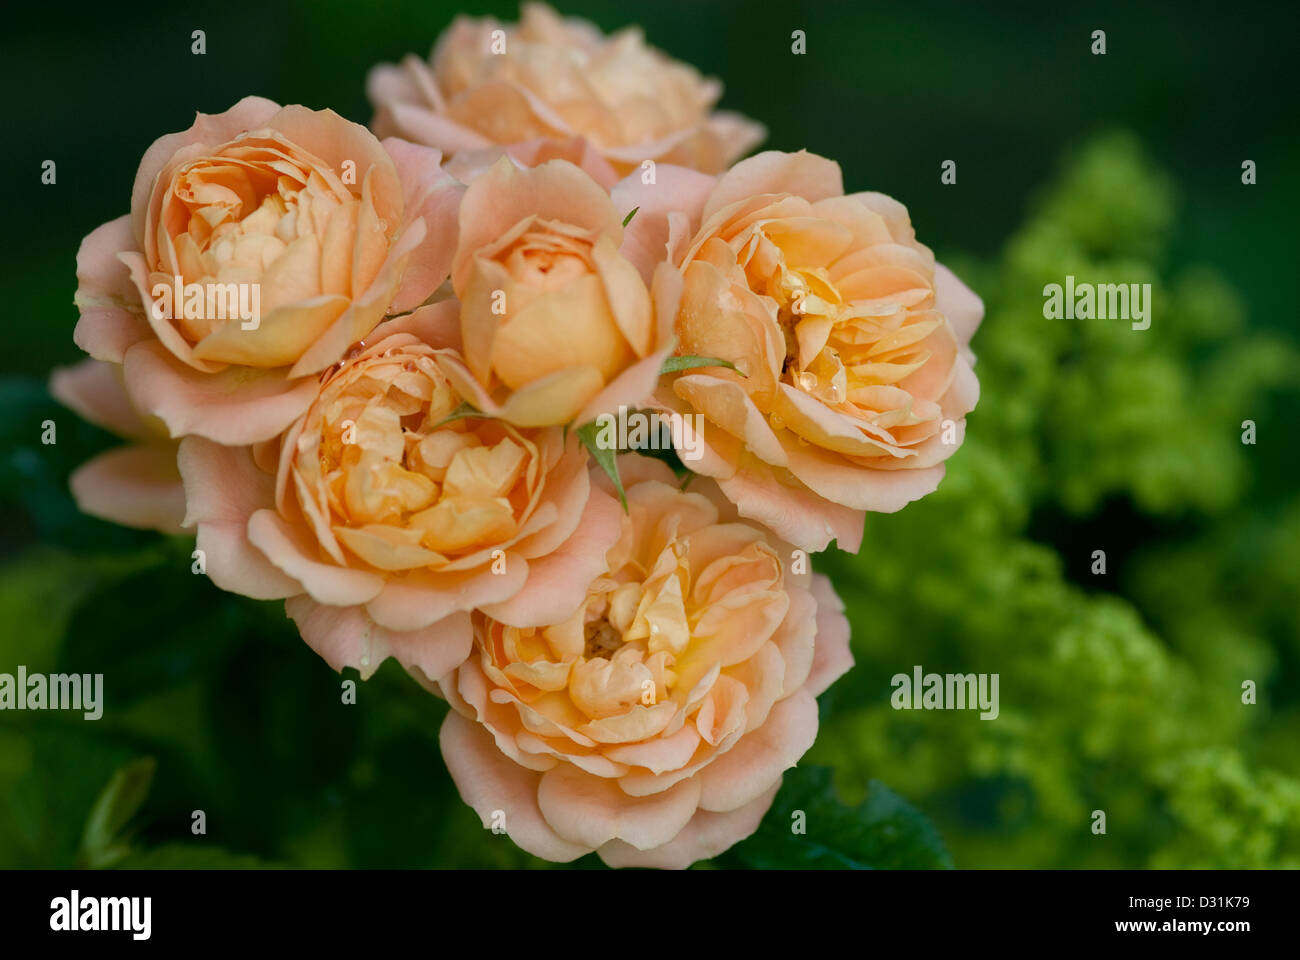 an image showing the striking blooms of the rose Sweet Dreams Stock Photo